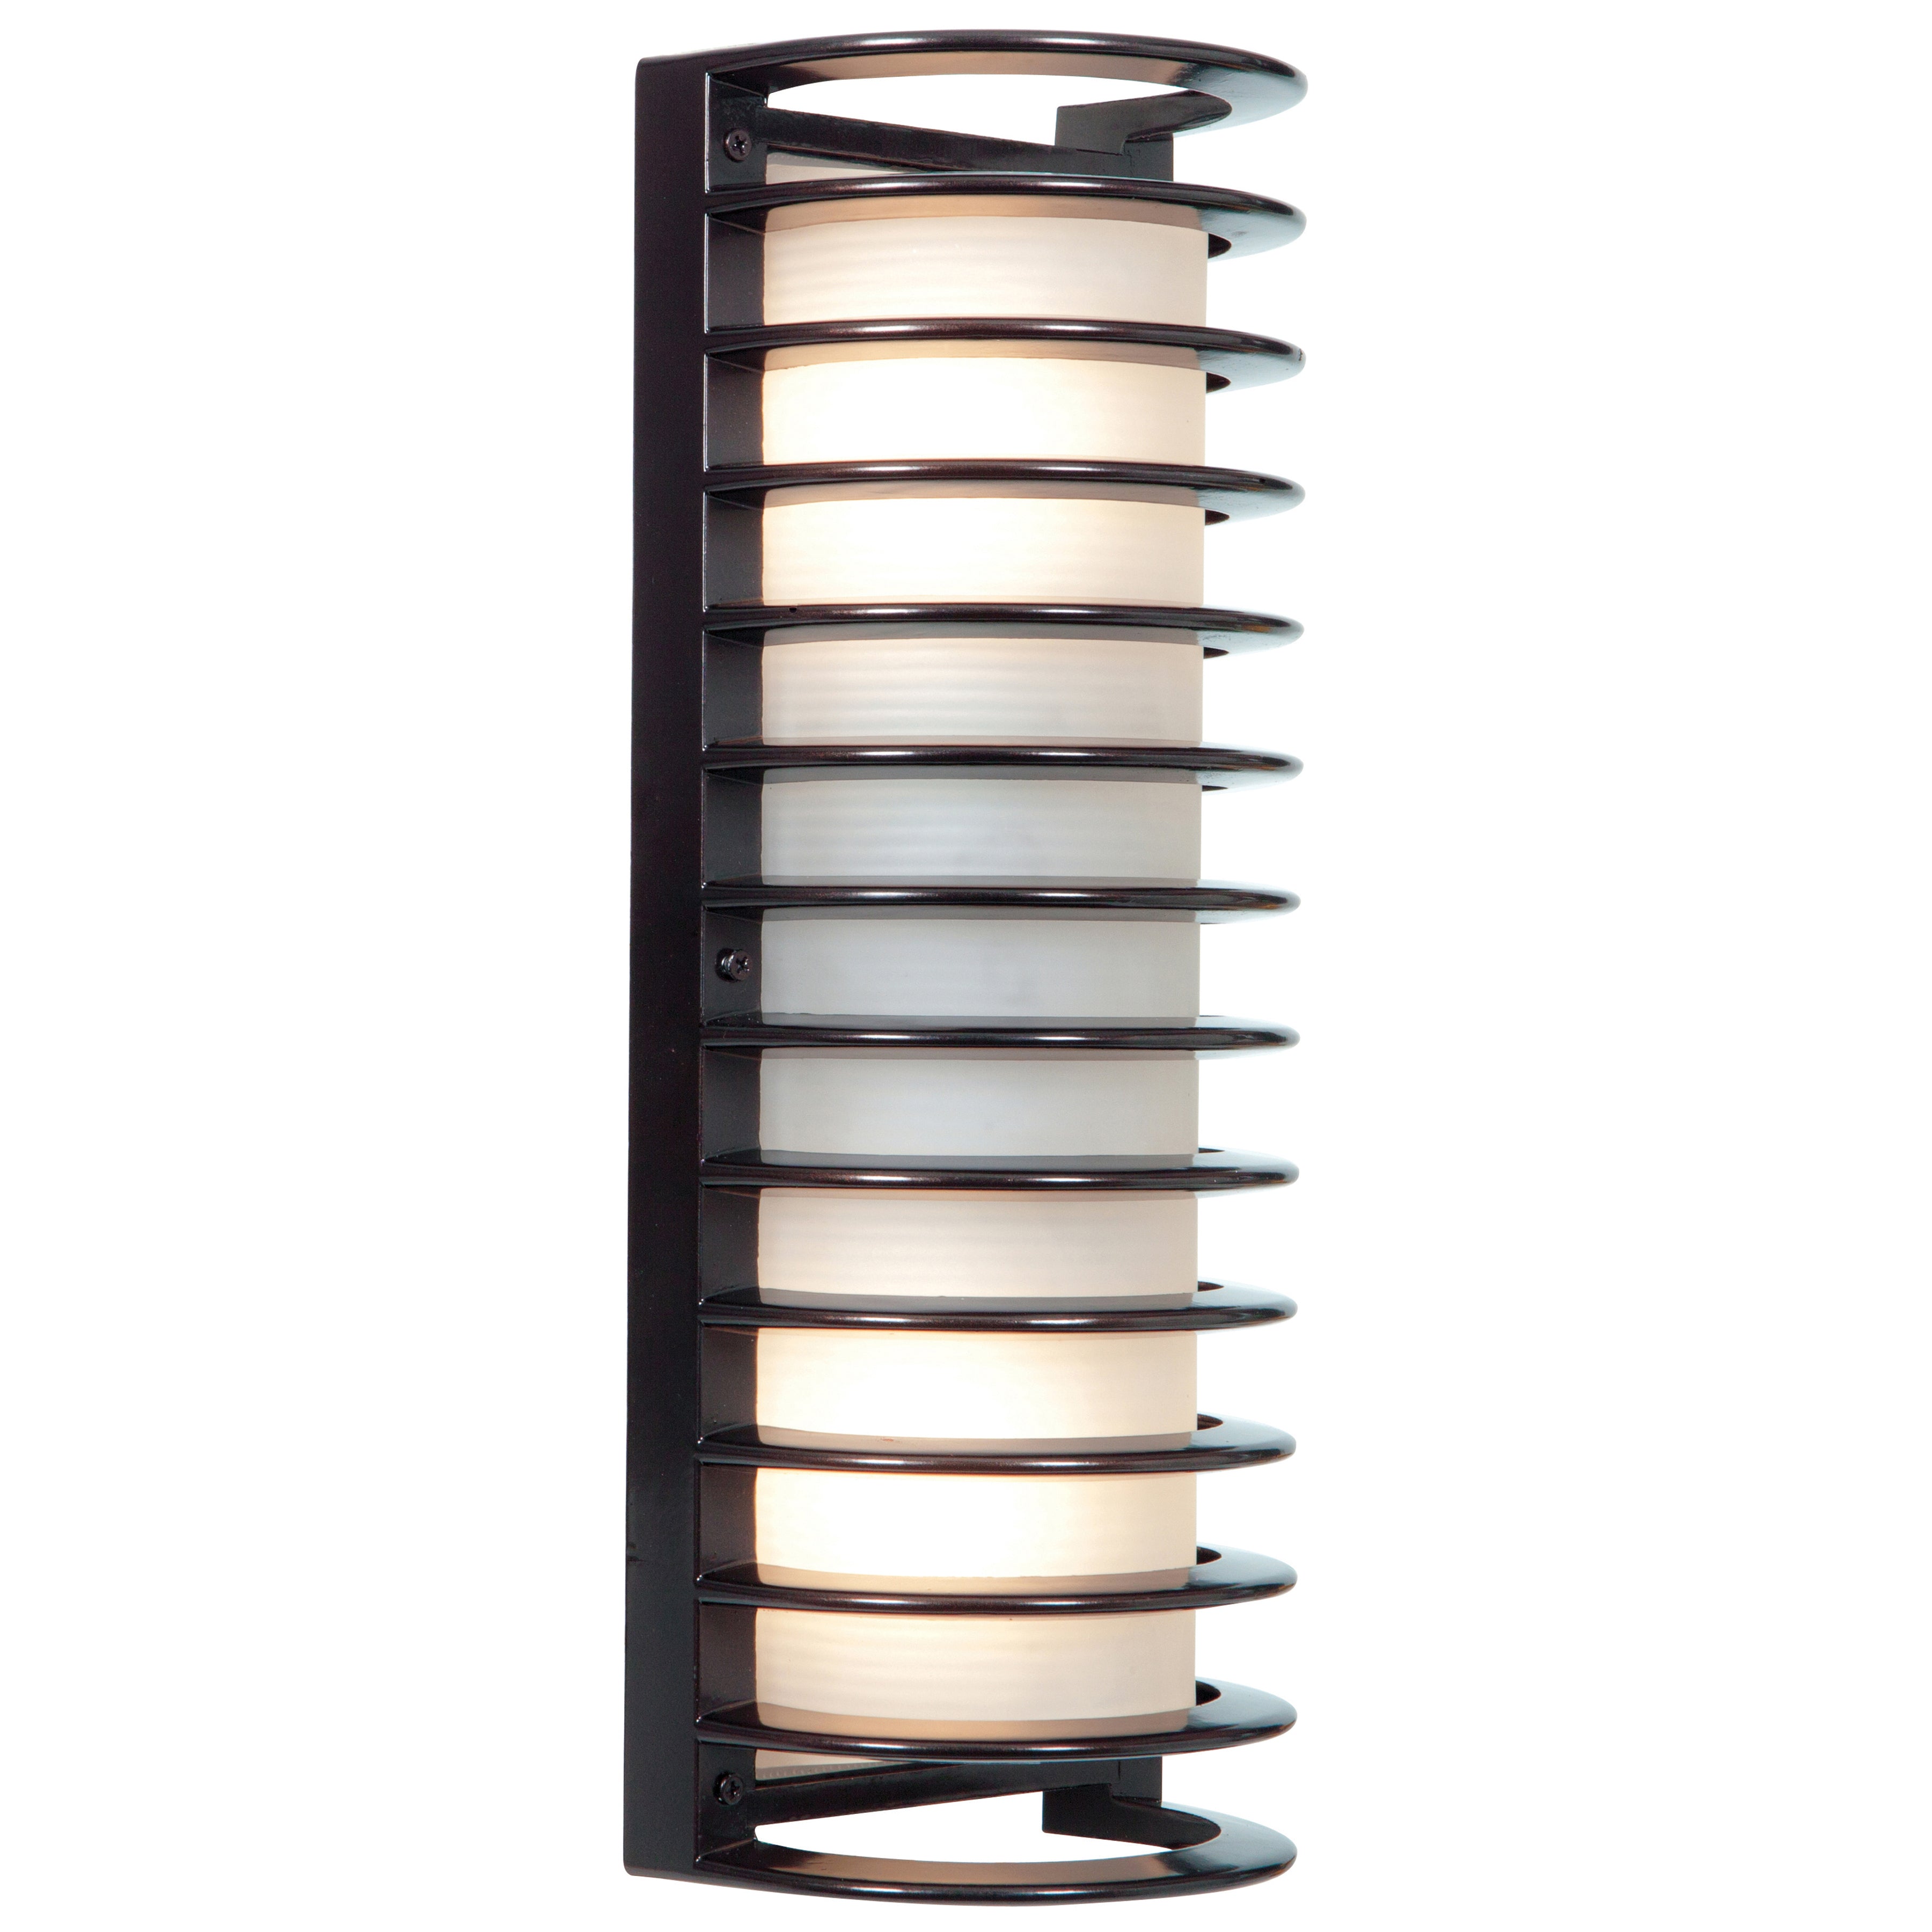 Phos Light Bermuda 10.5 in Outdoor LED 1-Light Wall Mount Sconce